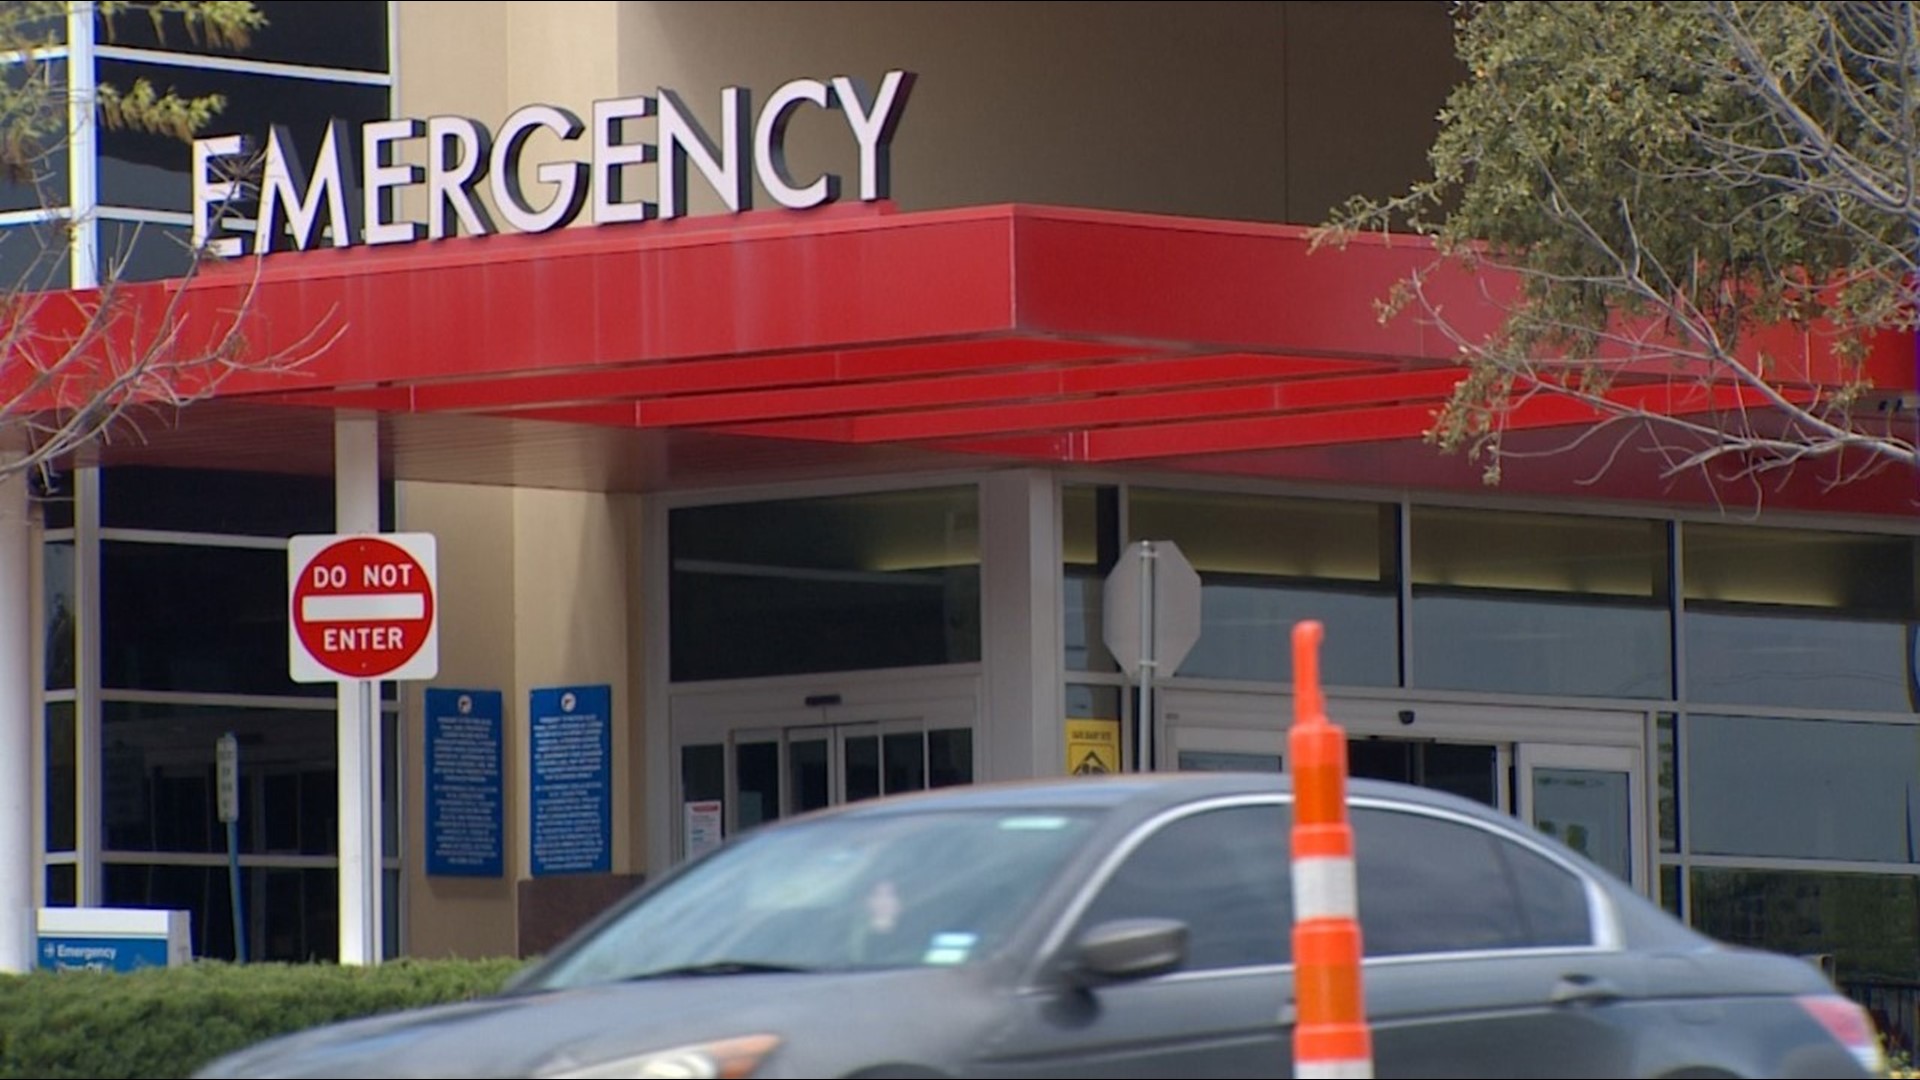 Dallas County Commissioners asked Dallas County Public Health leaders to provide a list of back-up plans if hospitals in North Texas reach capacity.